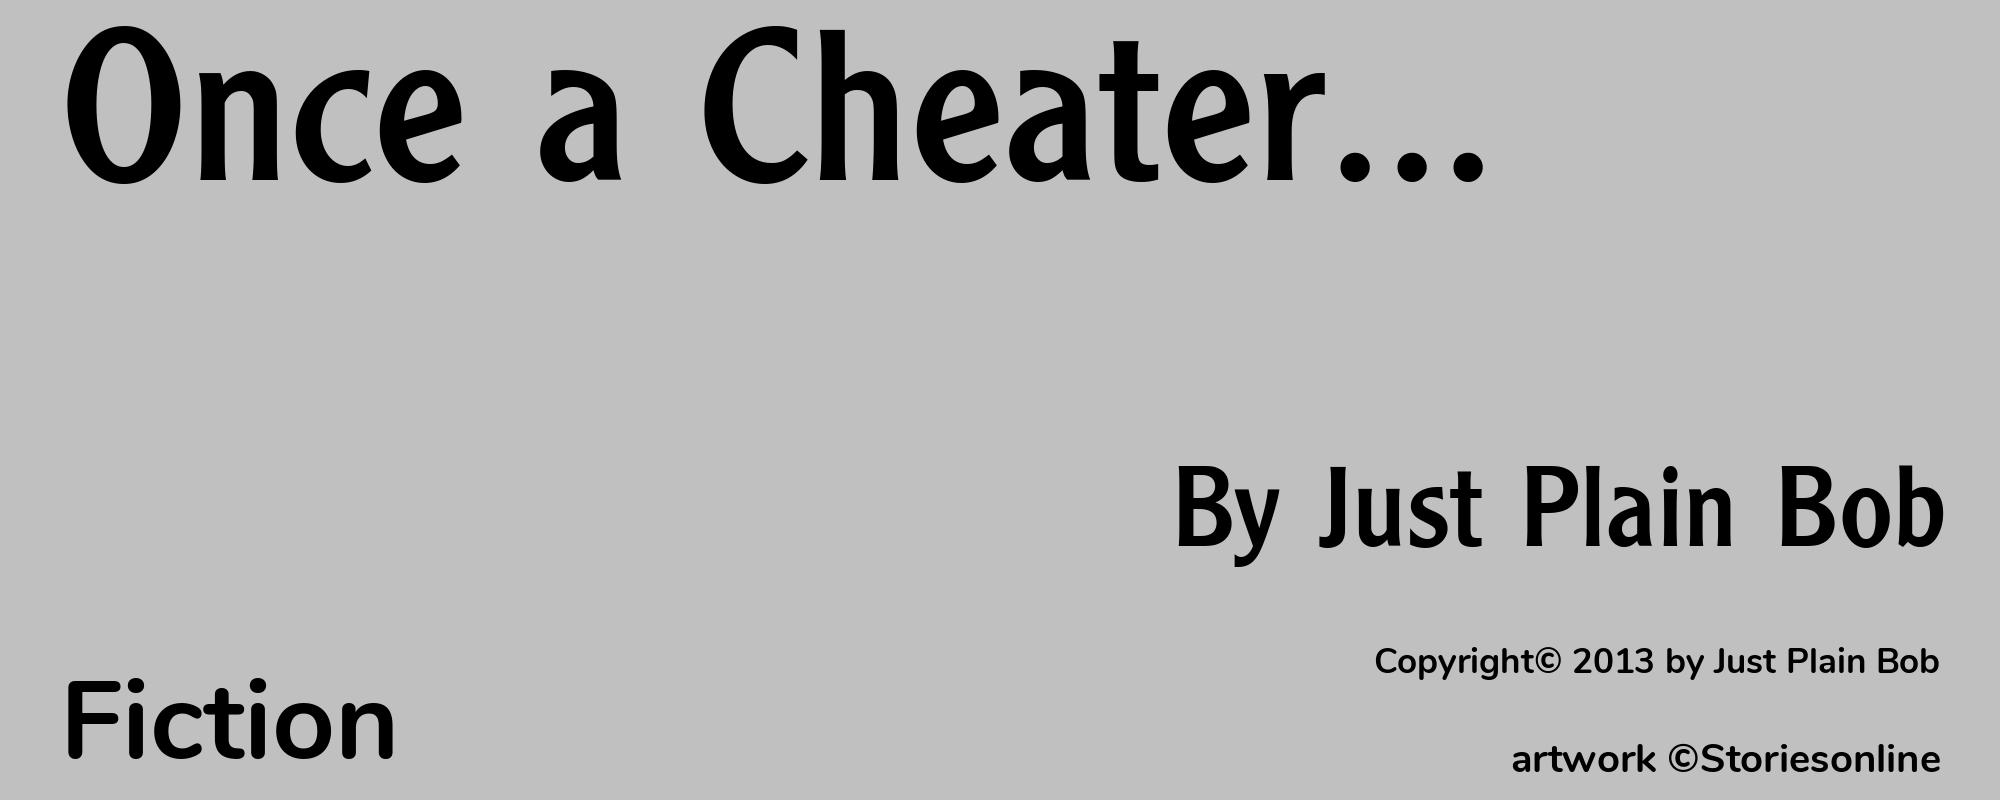 Once a Cheater... - Cover